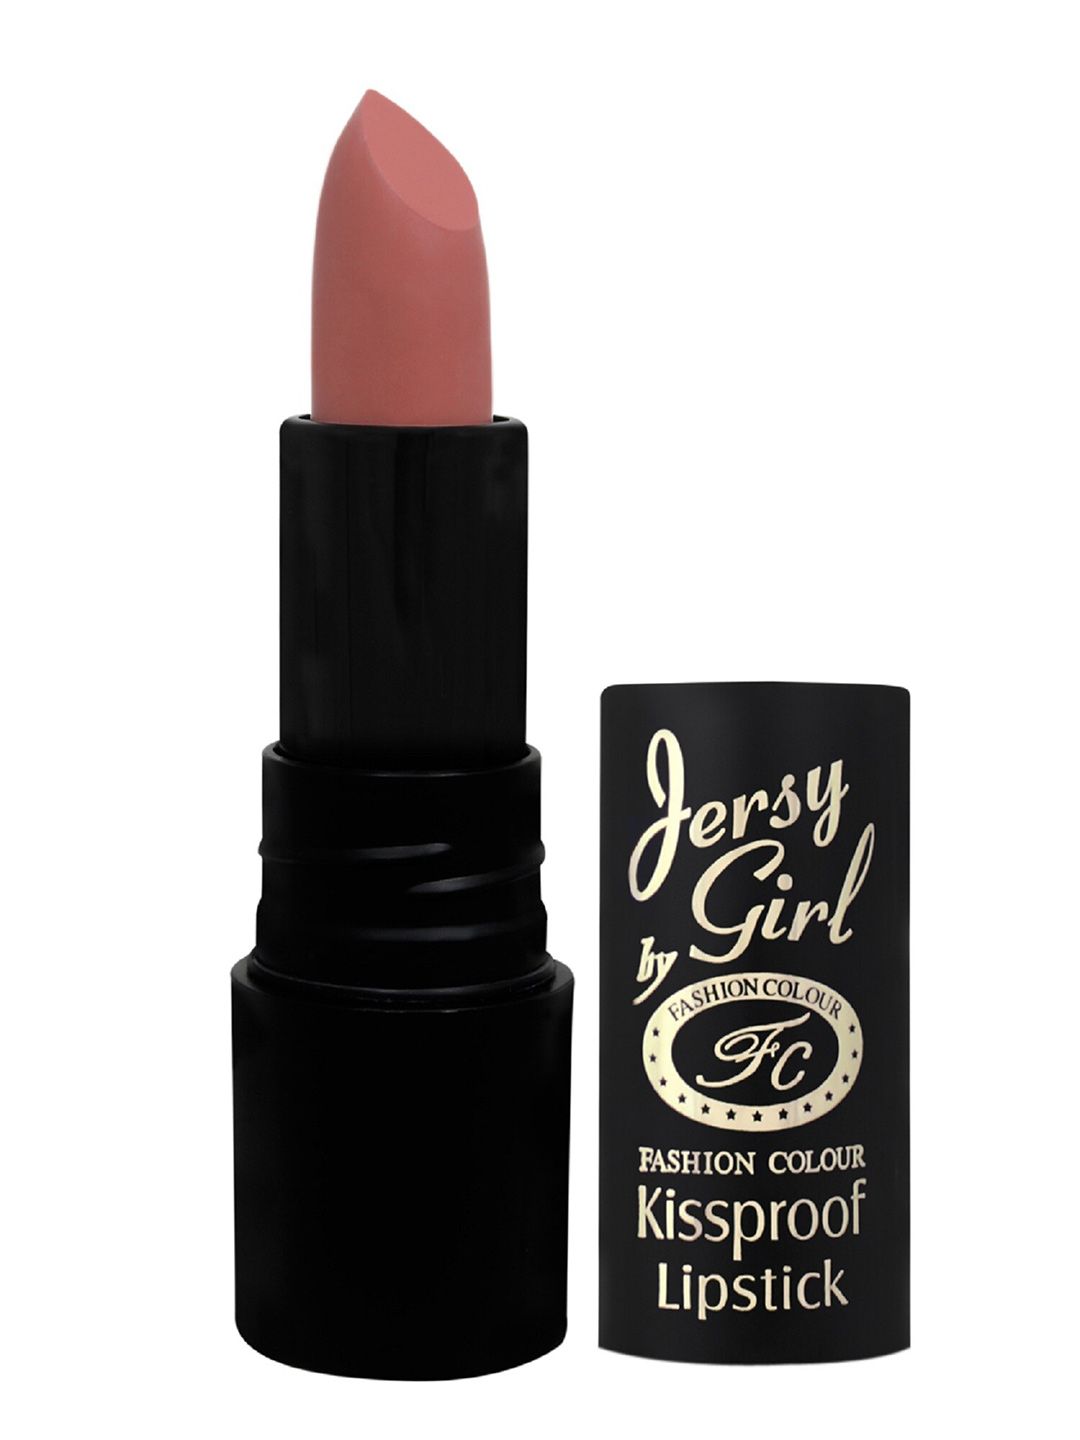 Fashion Colour Women Jersy Girl Kiss proof Lipstick - Rustic Brown 45 3.8 g Price in India